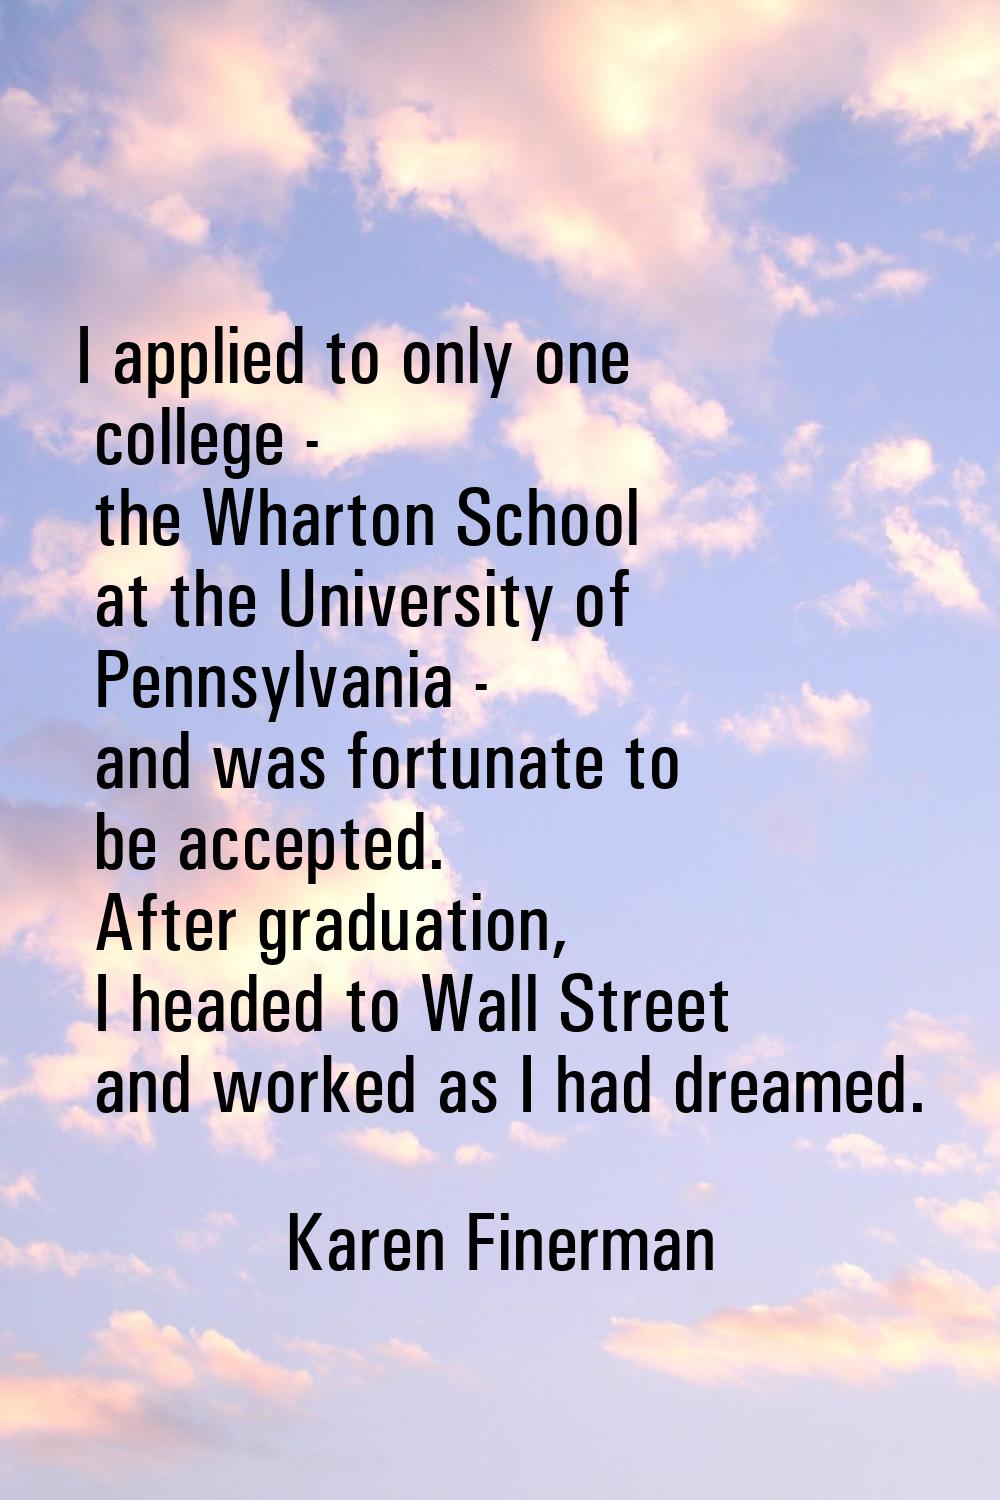 I applied to only one college - the Wharton School at the University of Pennsylvania - and was fort